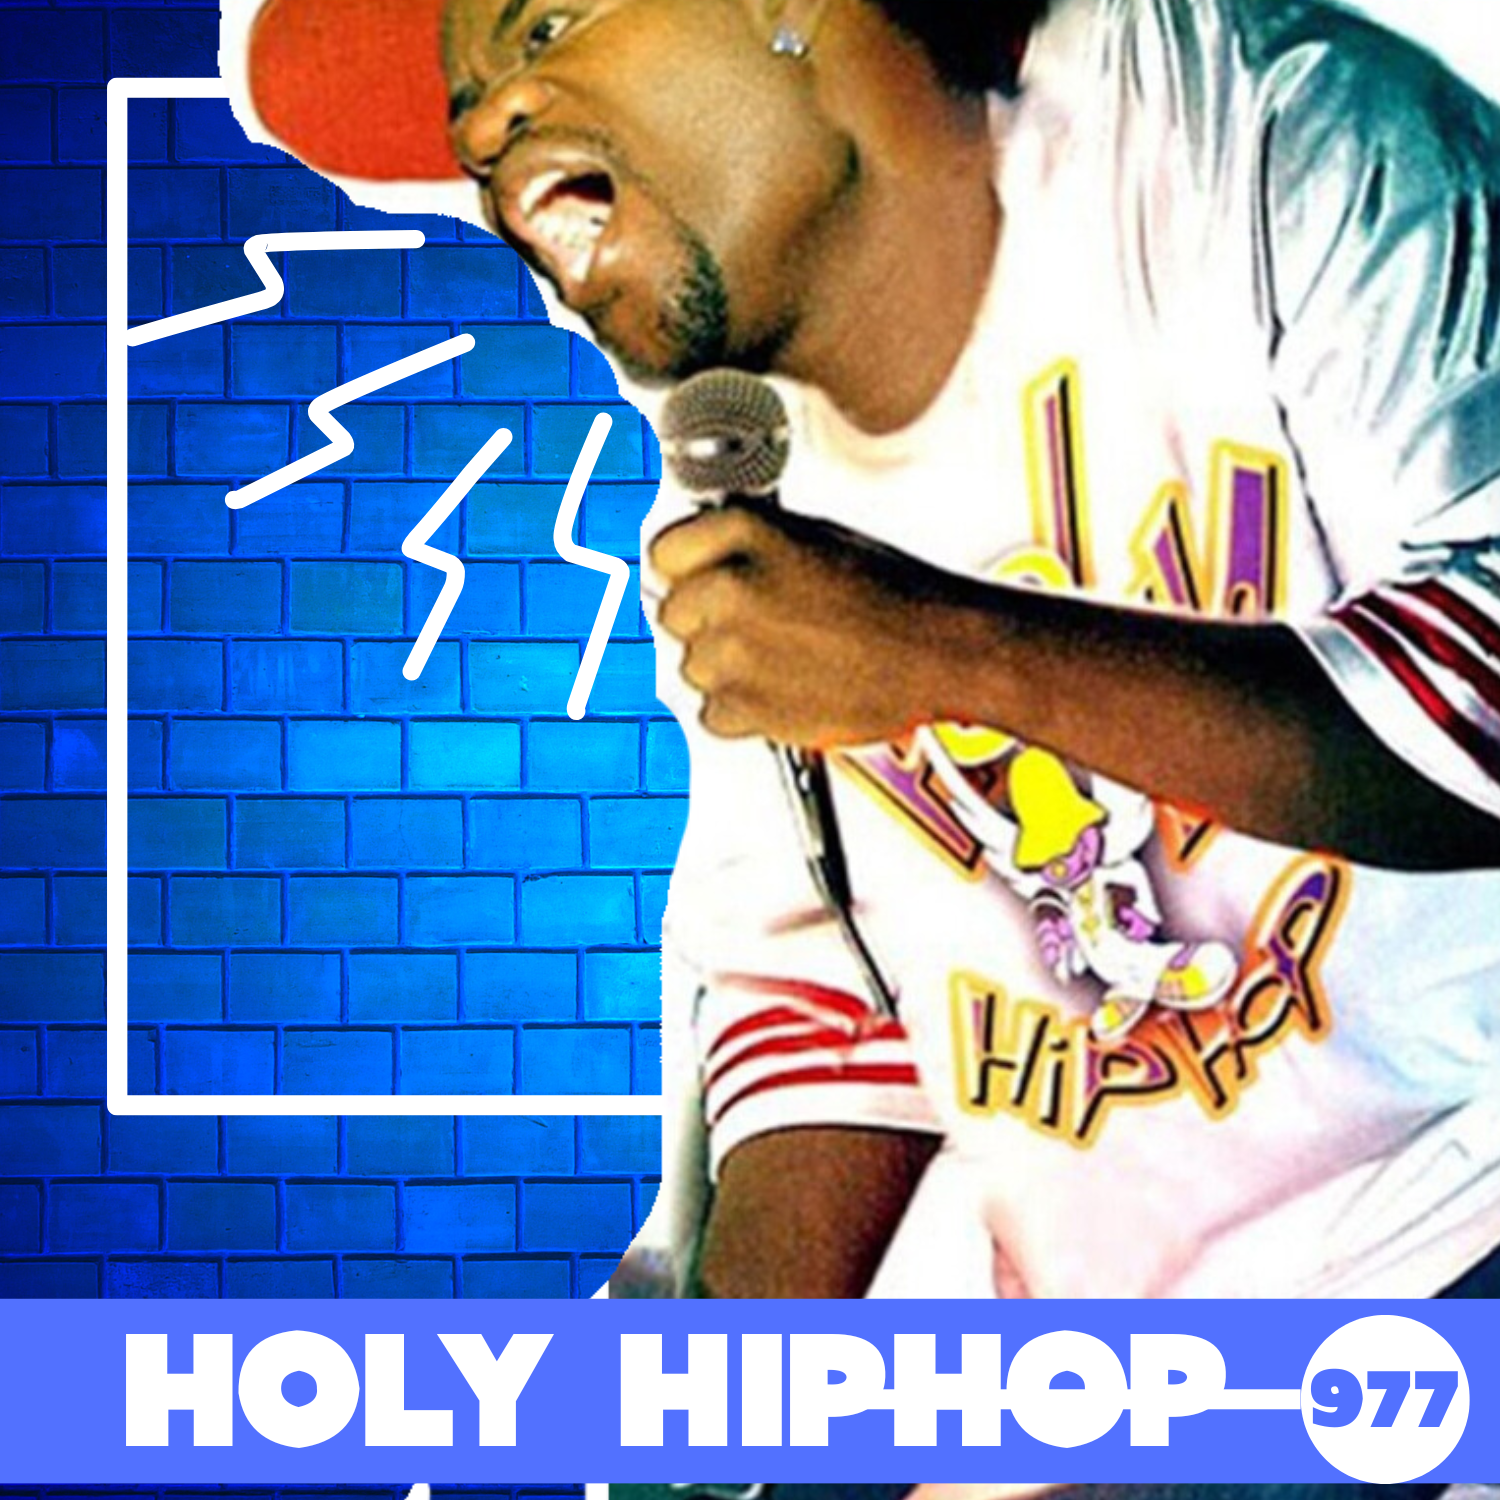 Holy Hiphop 977